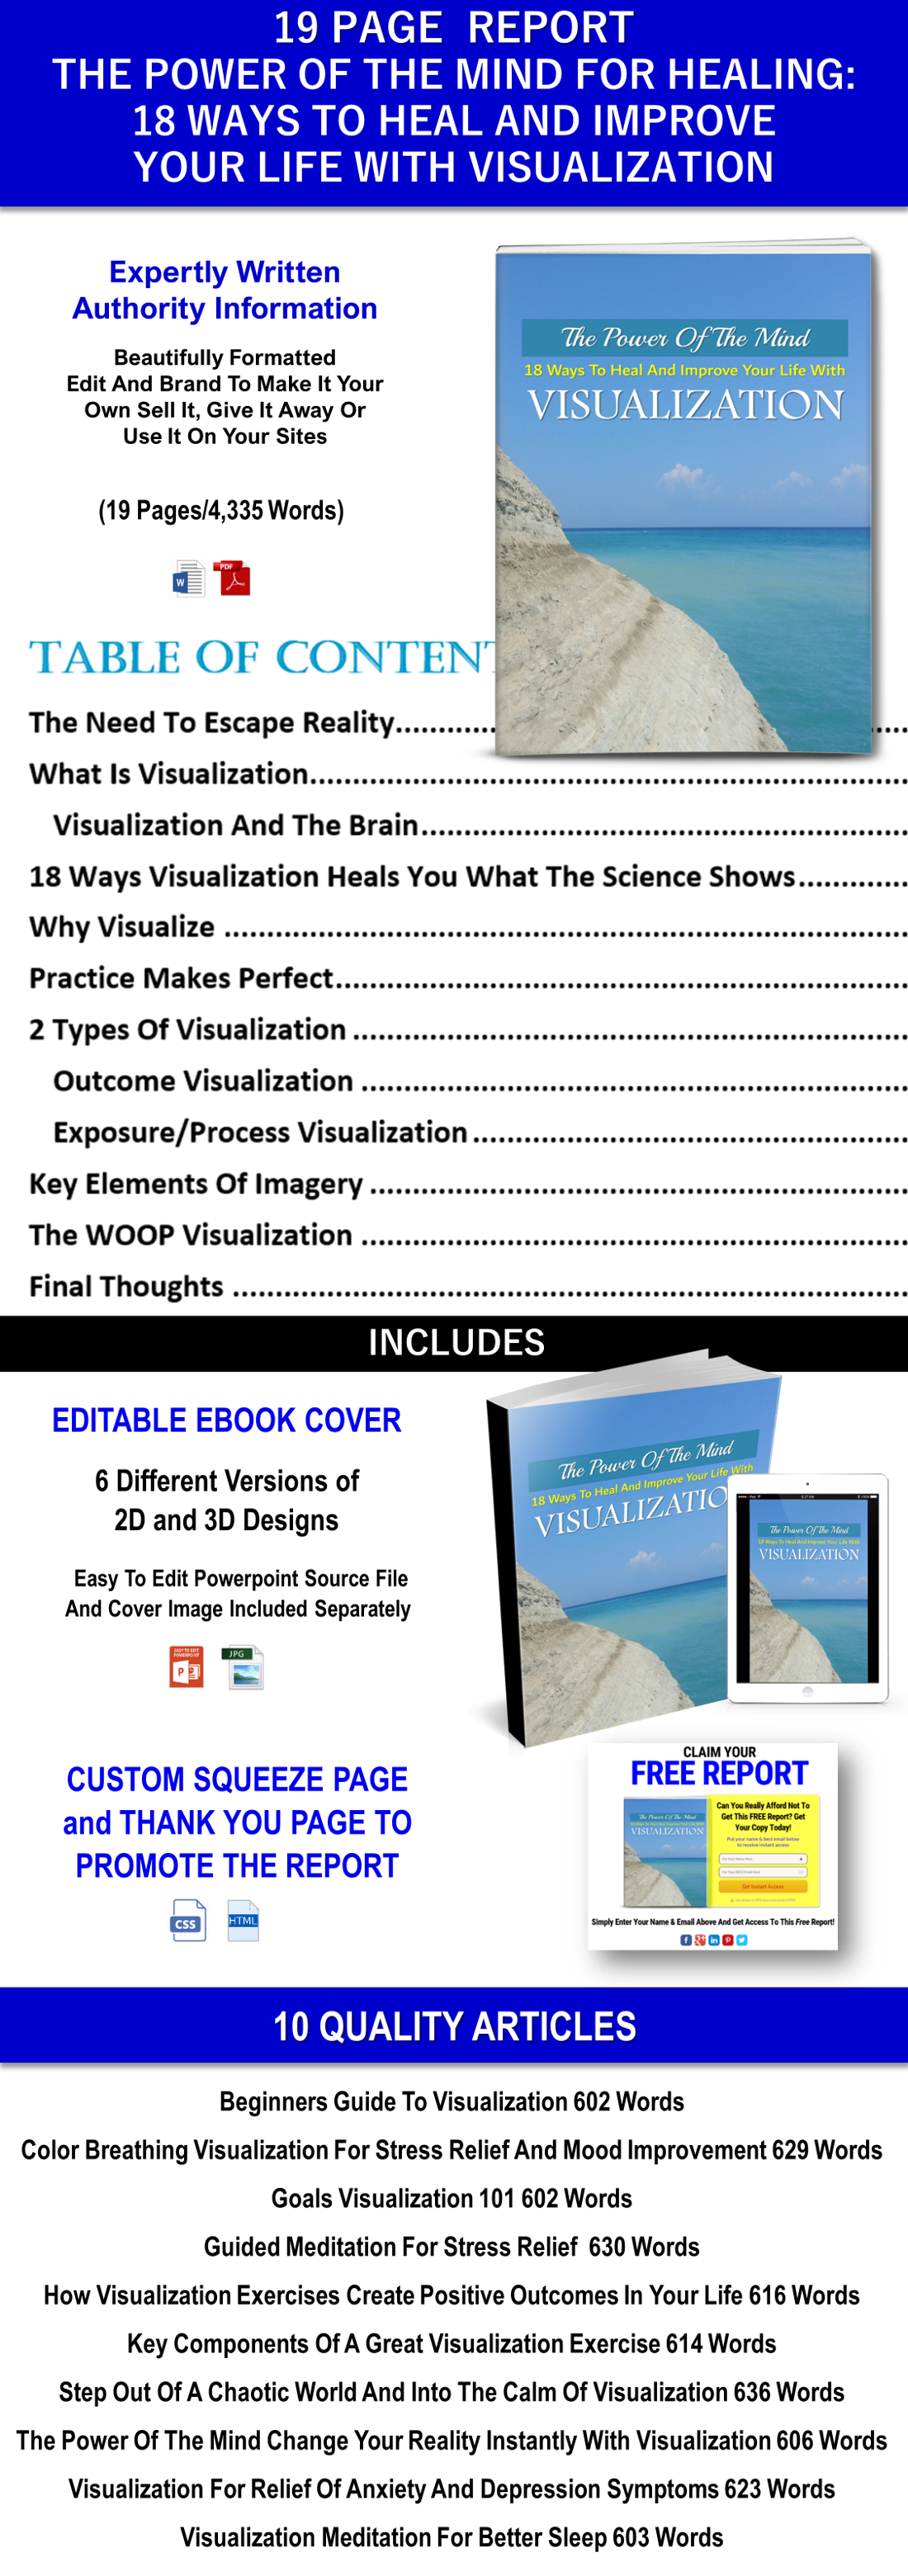 18 Ways To Heal And Improve Your Life With Visualization Report And 10 Articles PLR